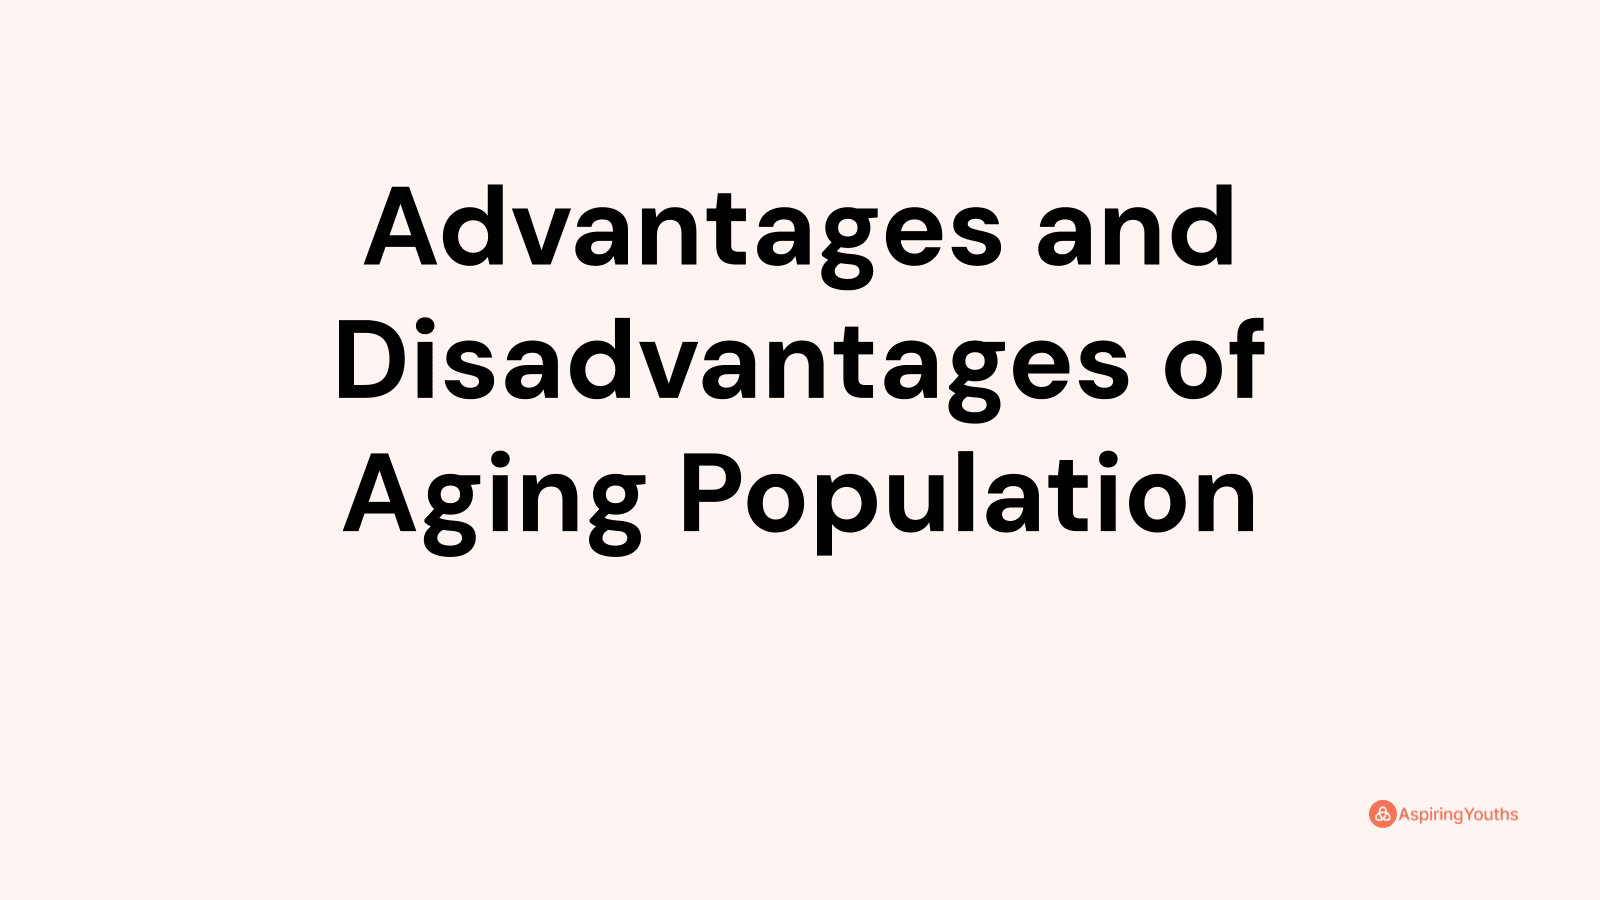 Advantages and disadvantages of Aging Population